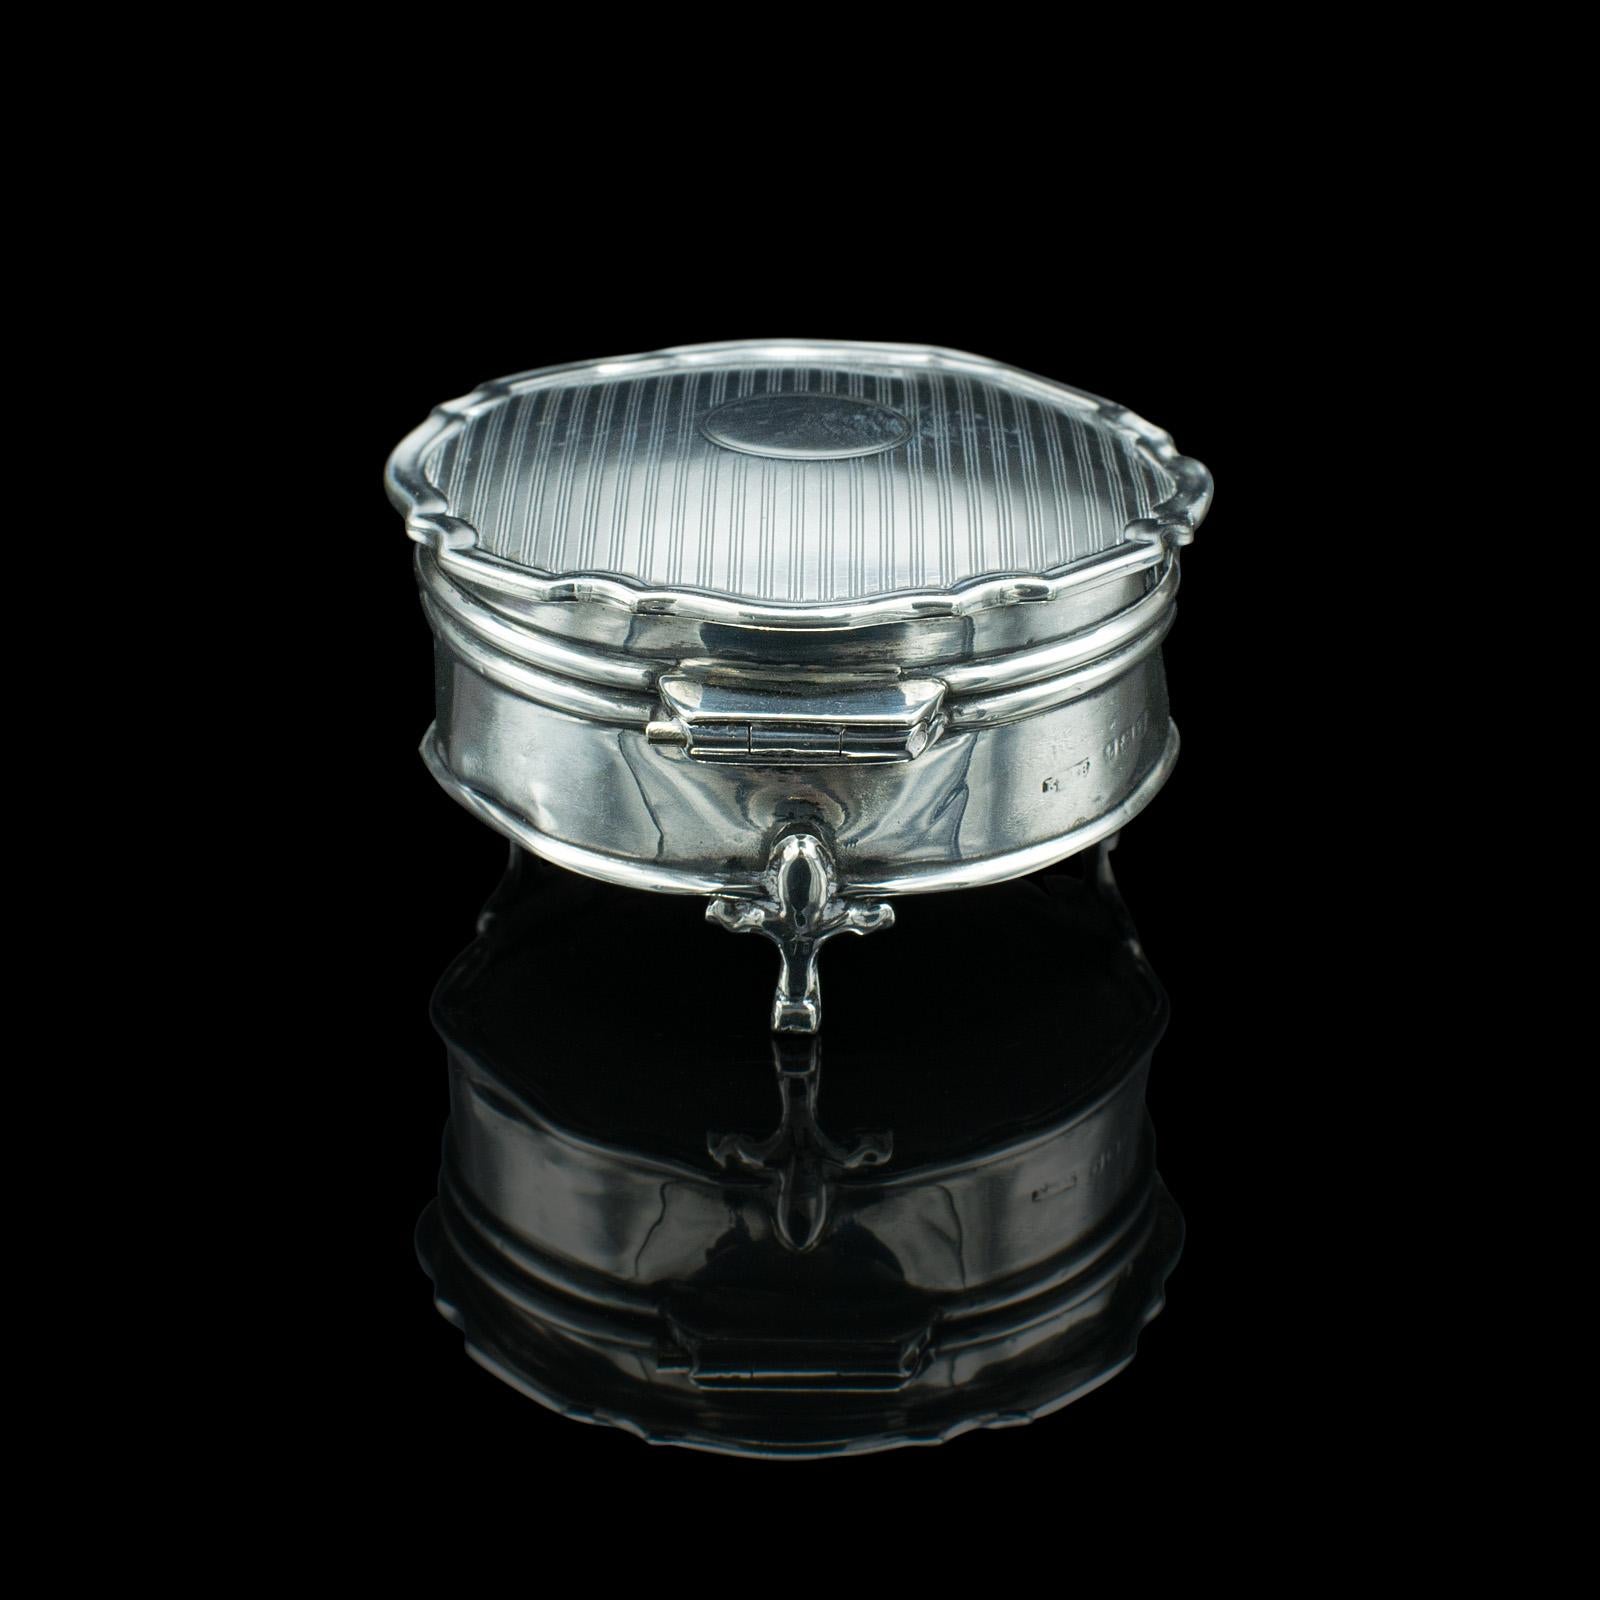 Small Antique Dressing Table Ring Box, English Silver, Birmingham Hallmark, 1921 In Good Condition For Sale In Hele, Devon, GB